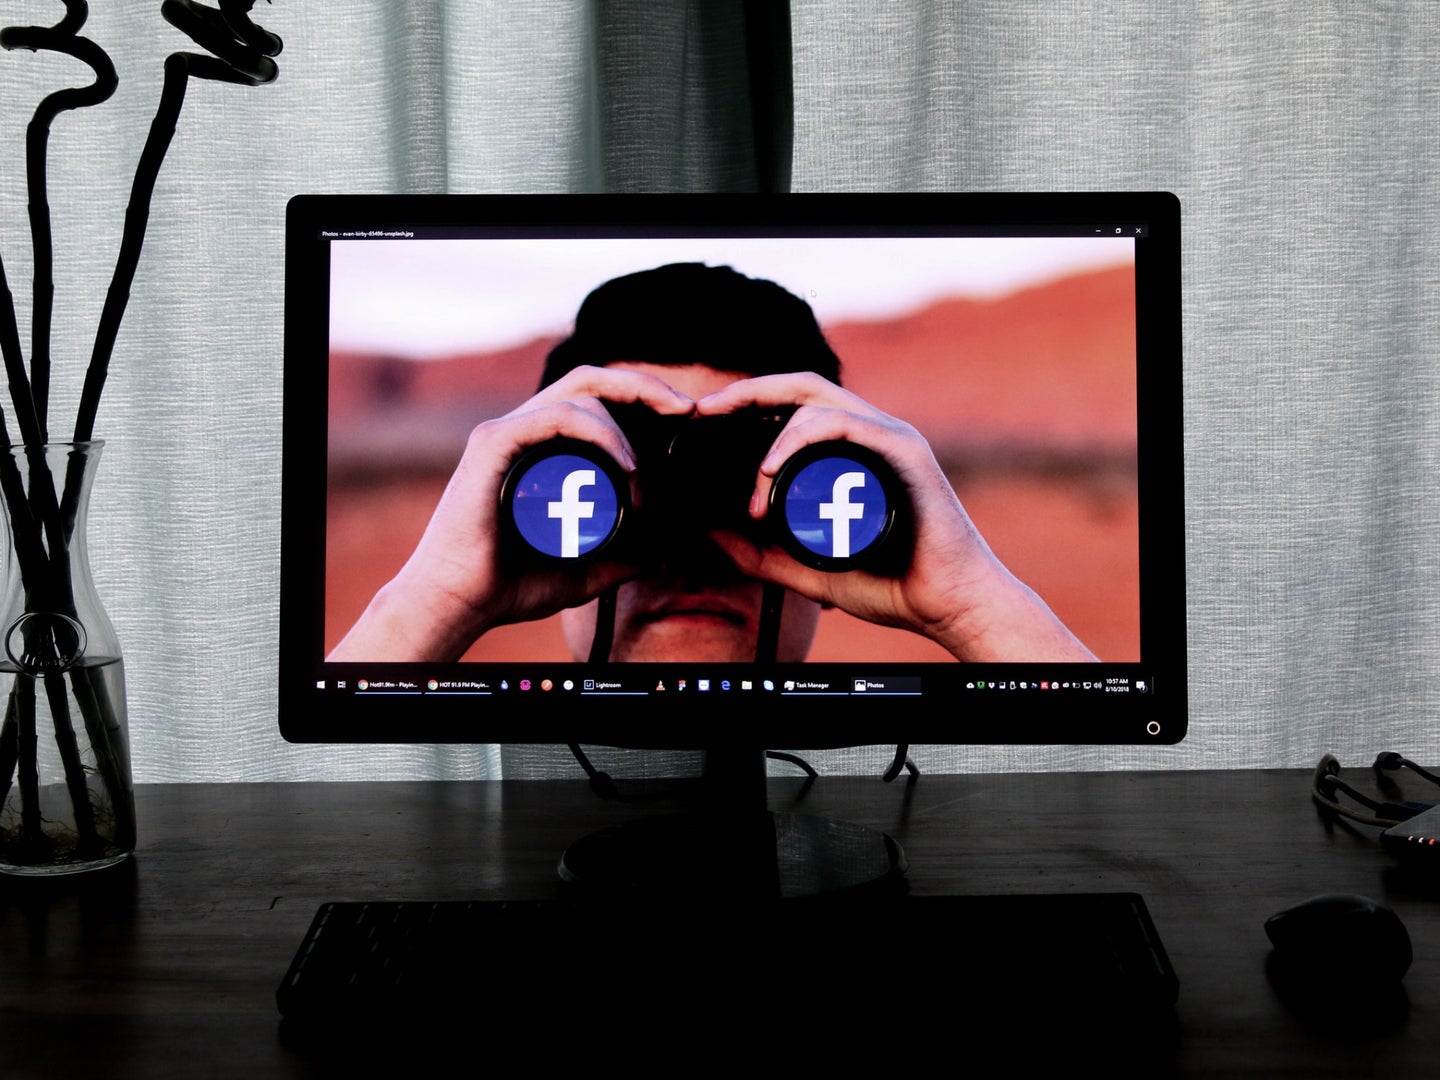 A man use binoculars with the Facebook icon on the lenses looking out from a desktop computer screen.